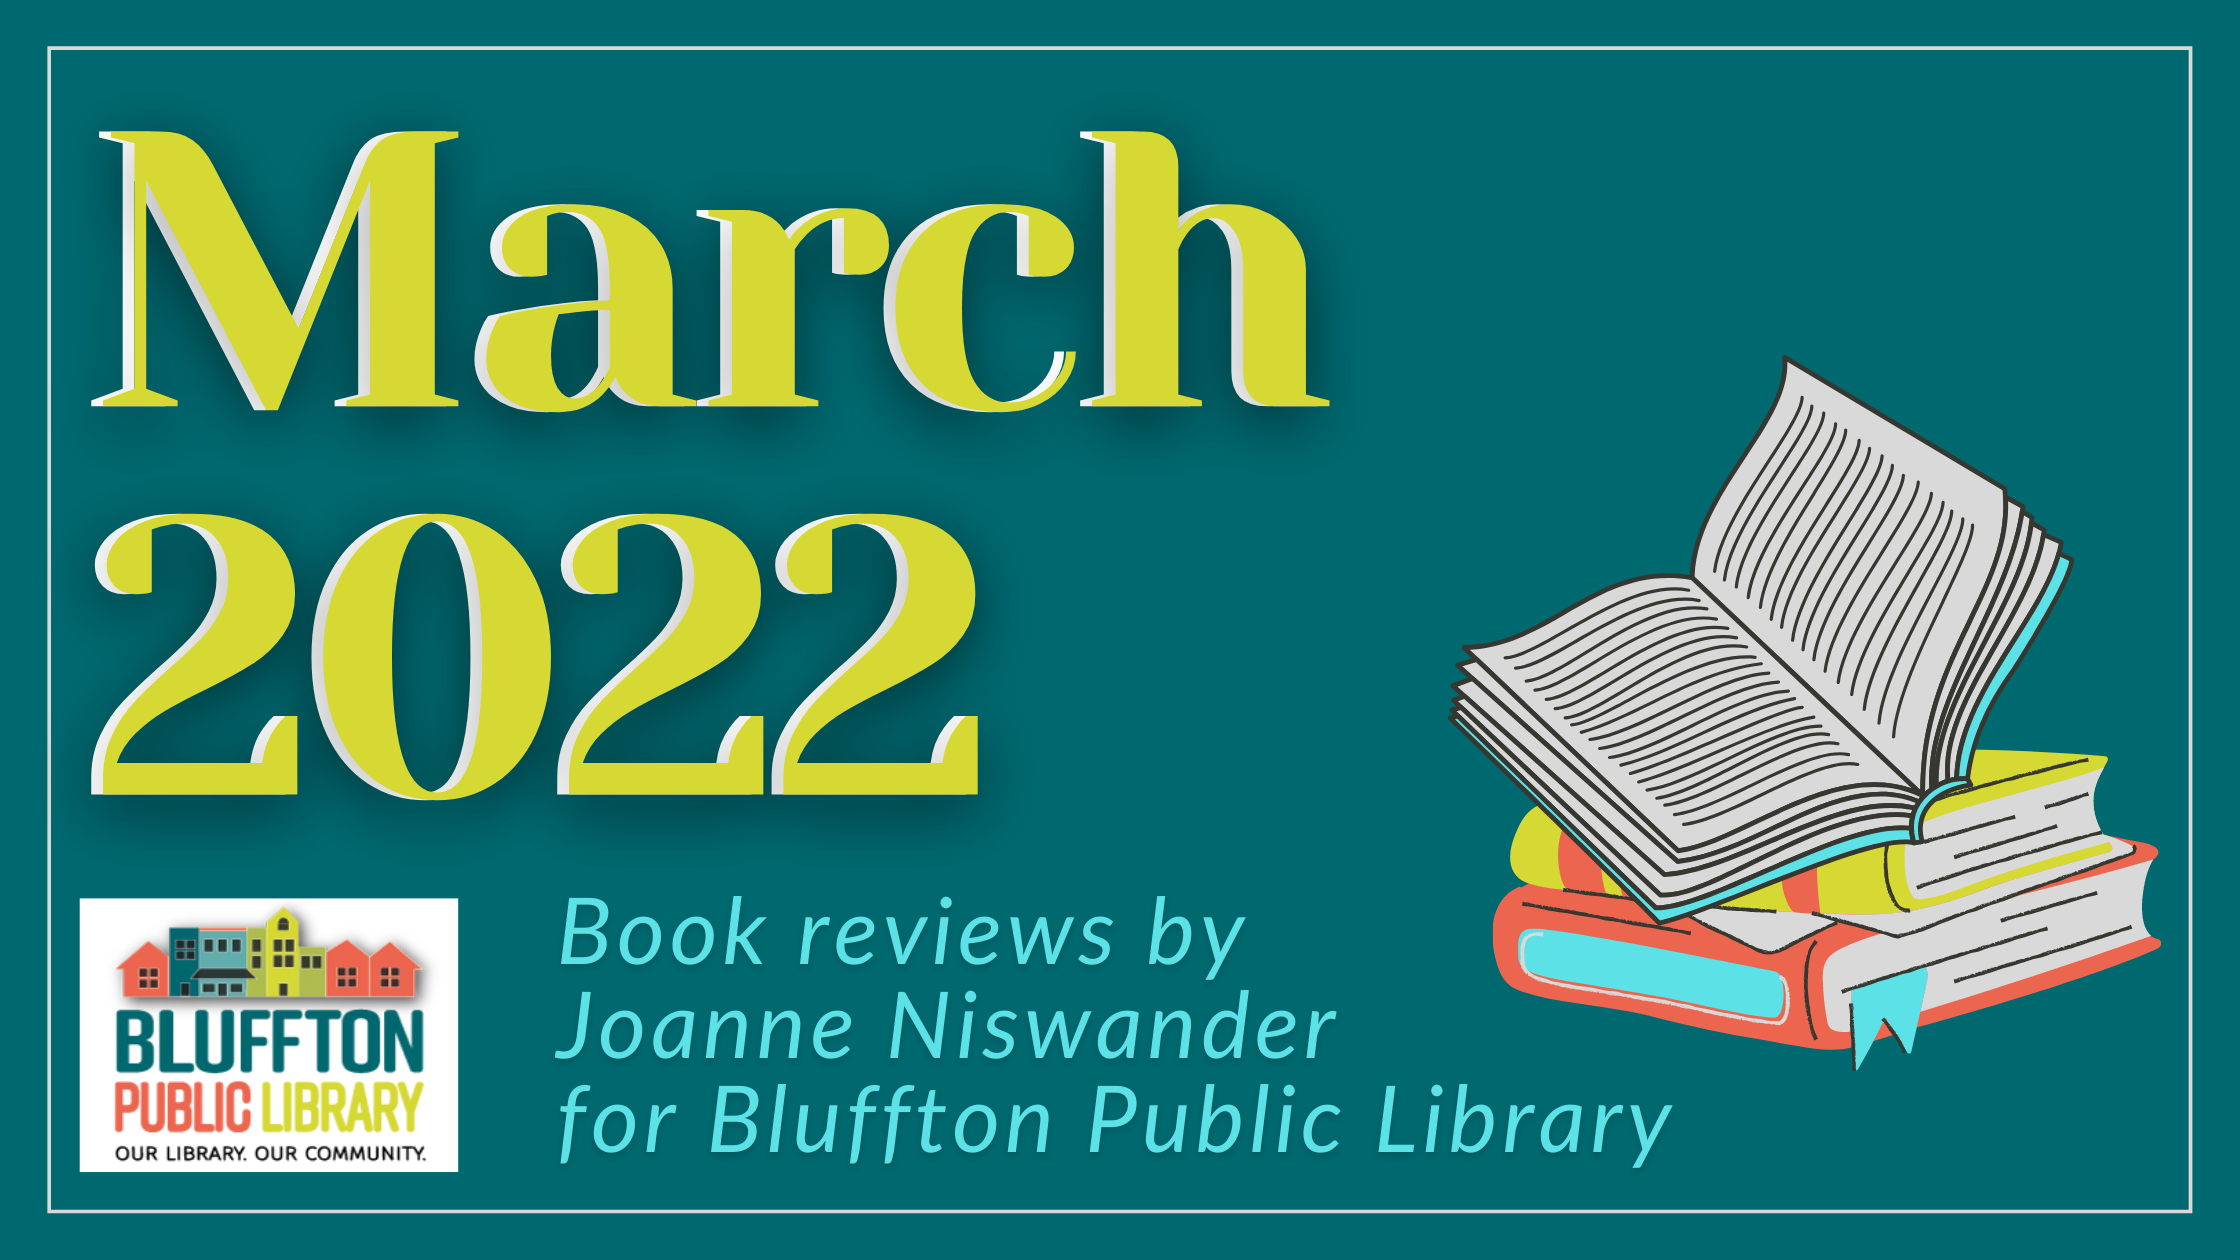 Joanne Read's - March 2022 book reviews